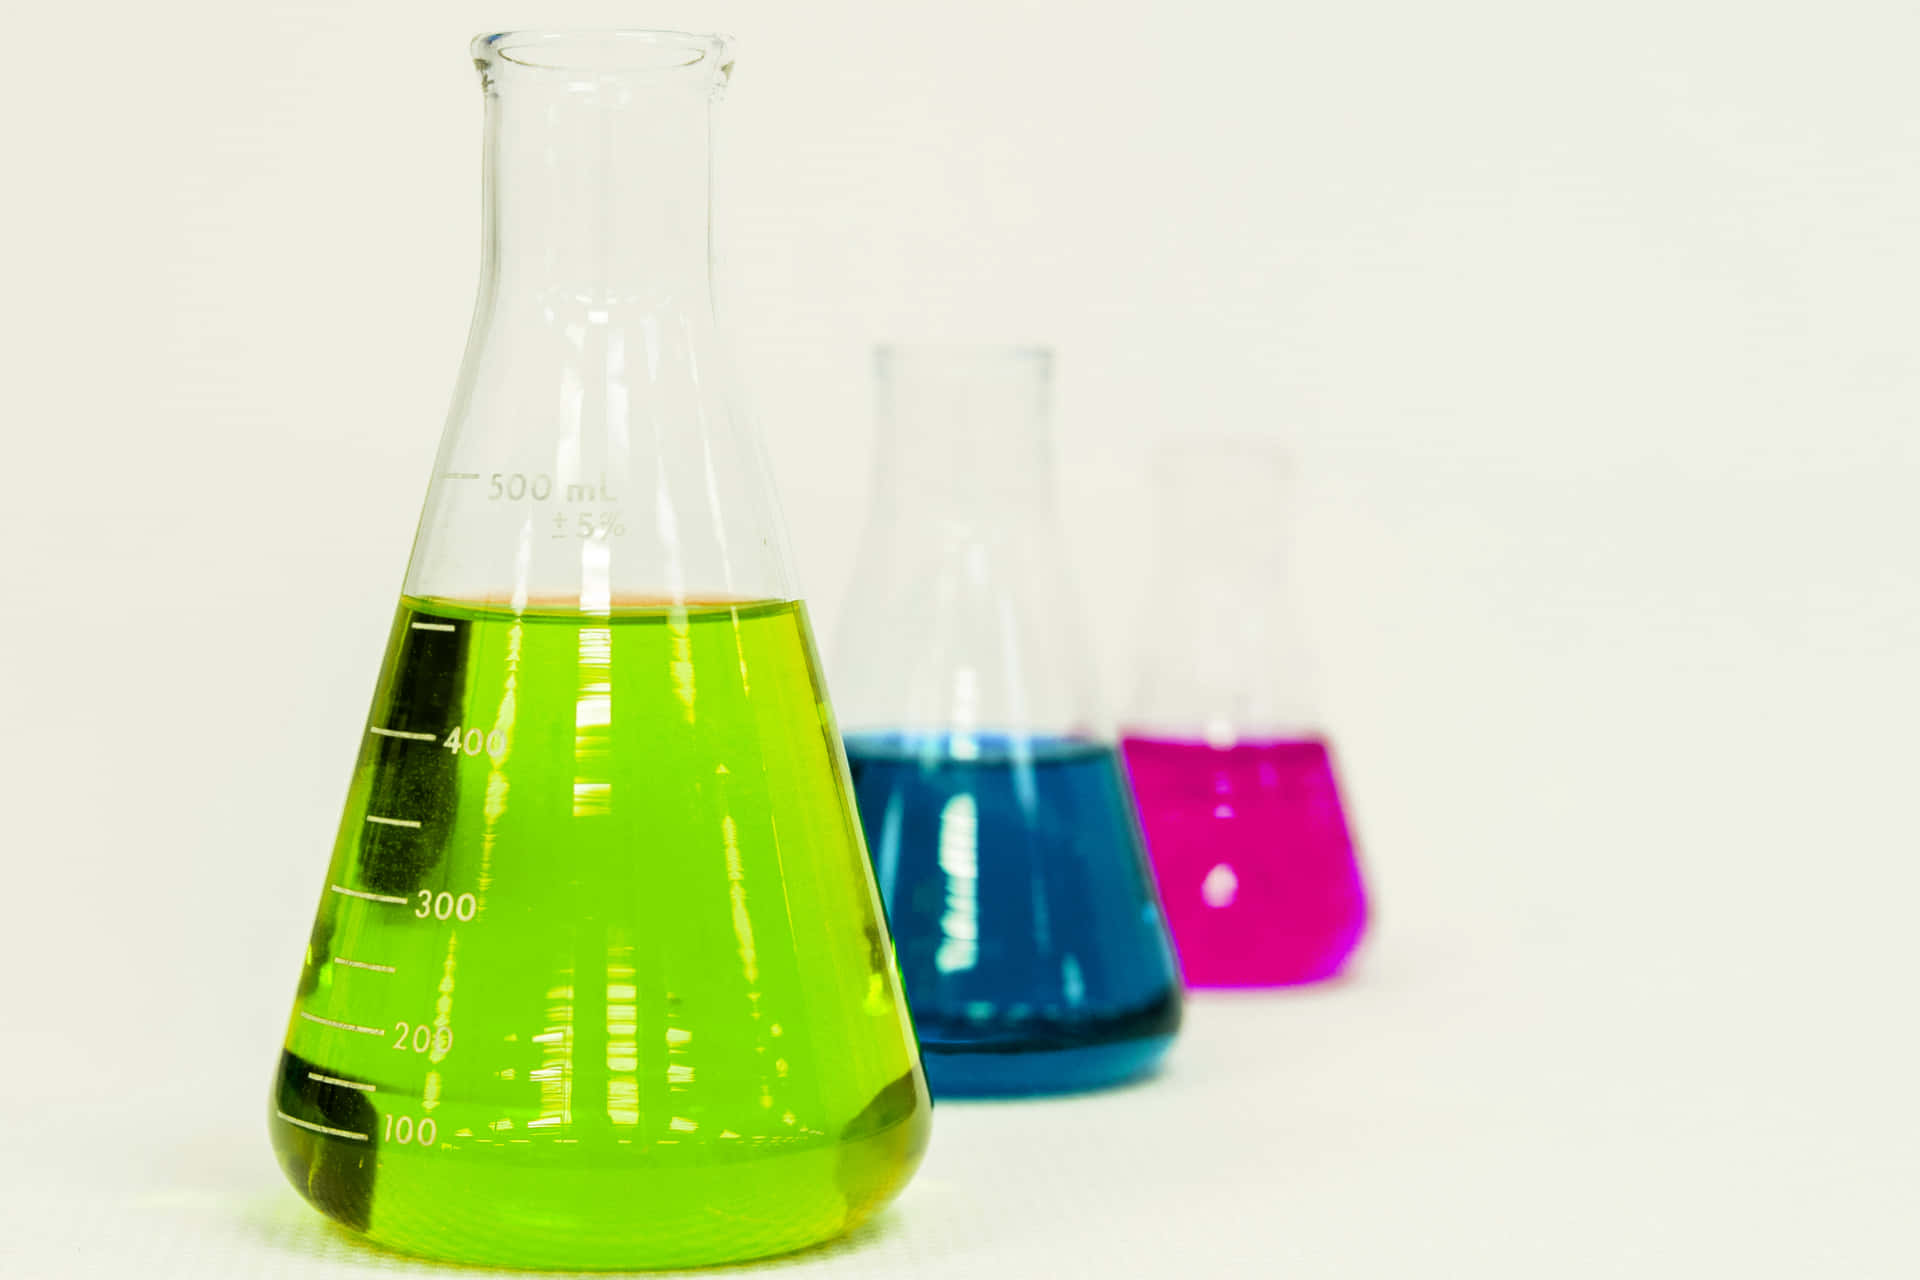 Laboratory Flasks With Colorful Liquids Wallpaper